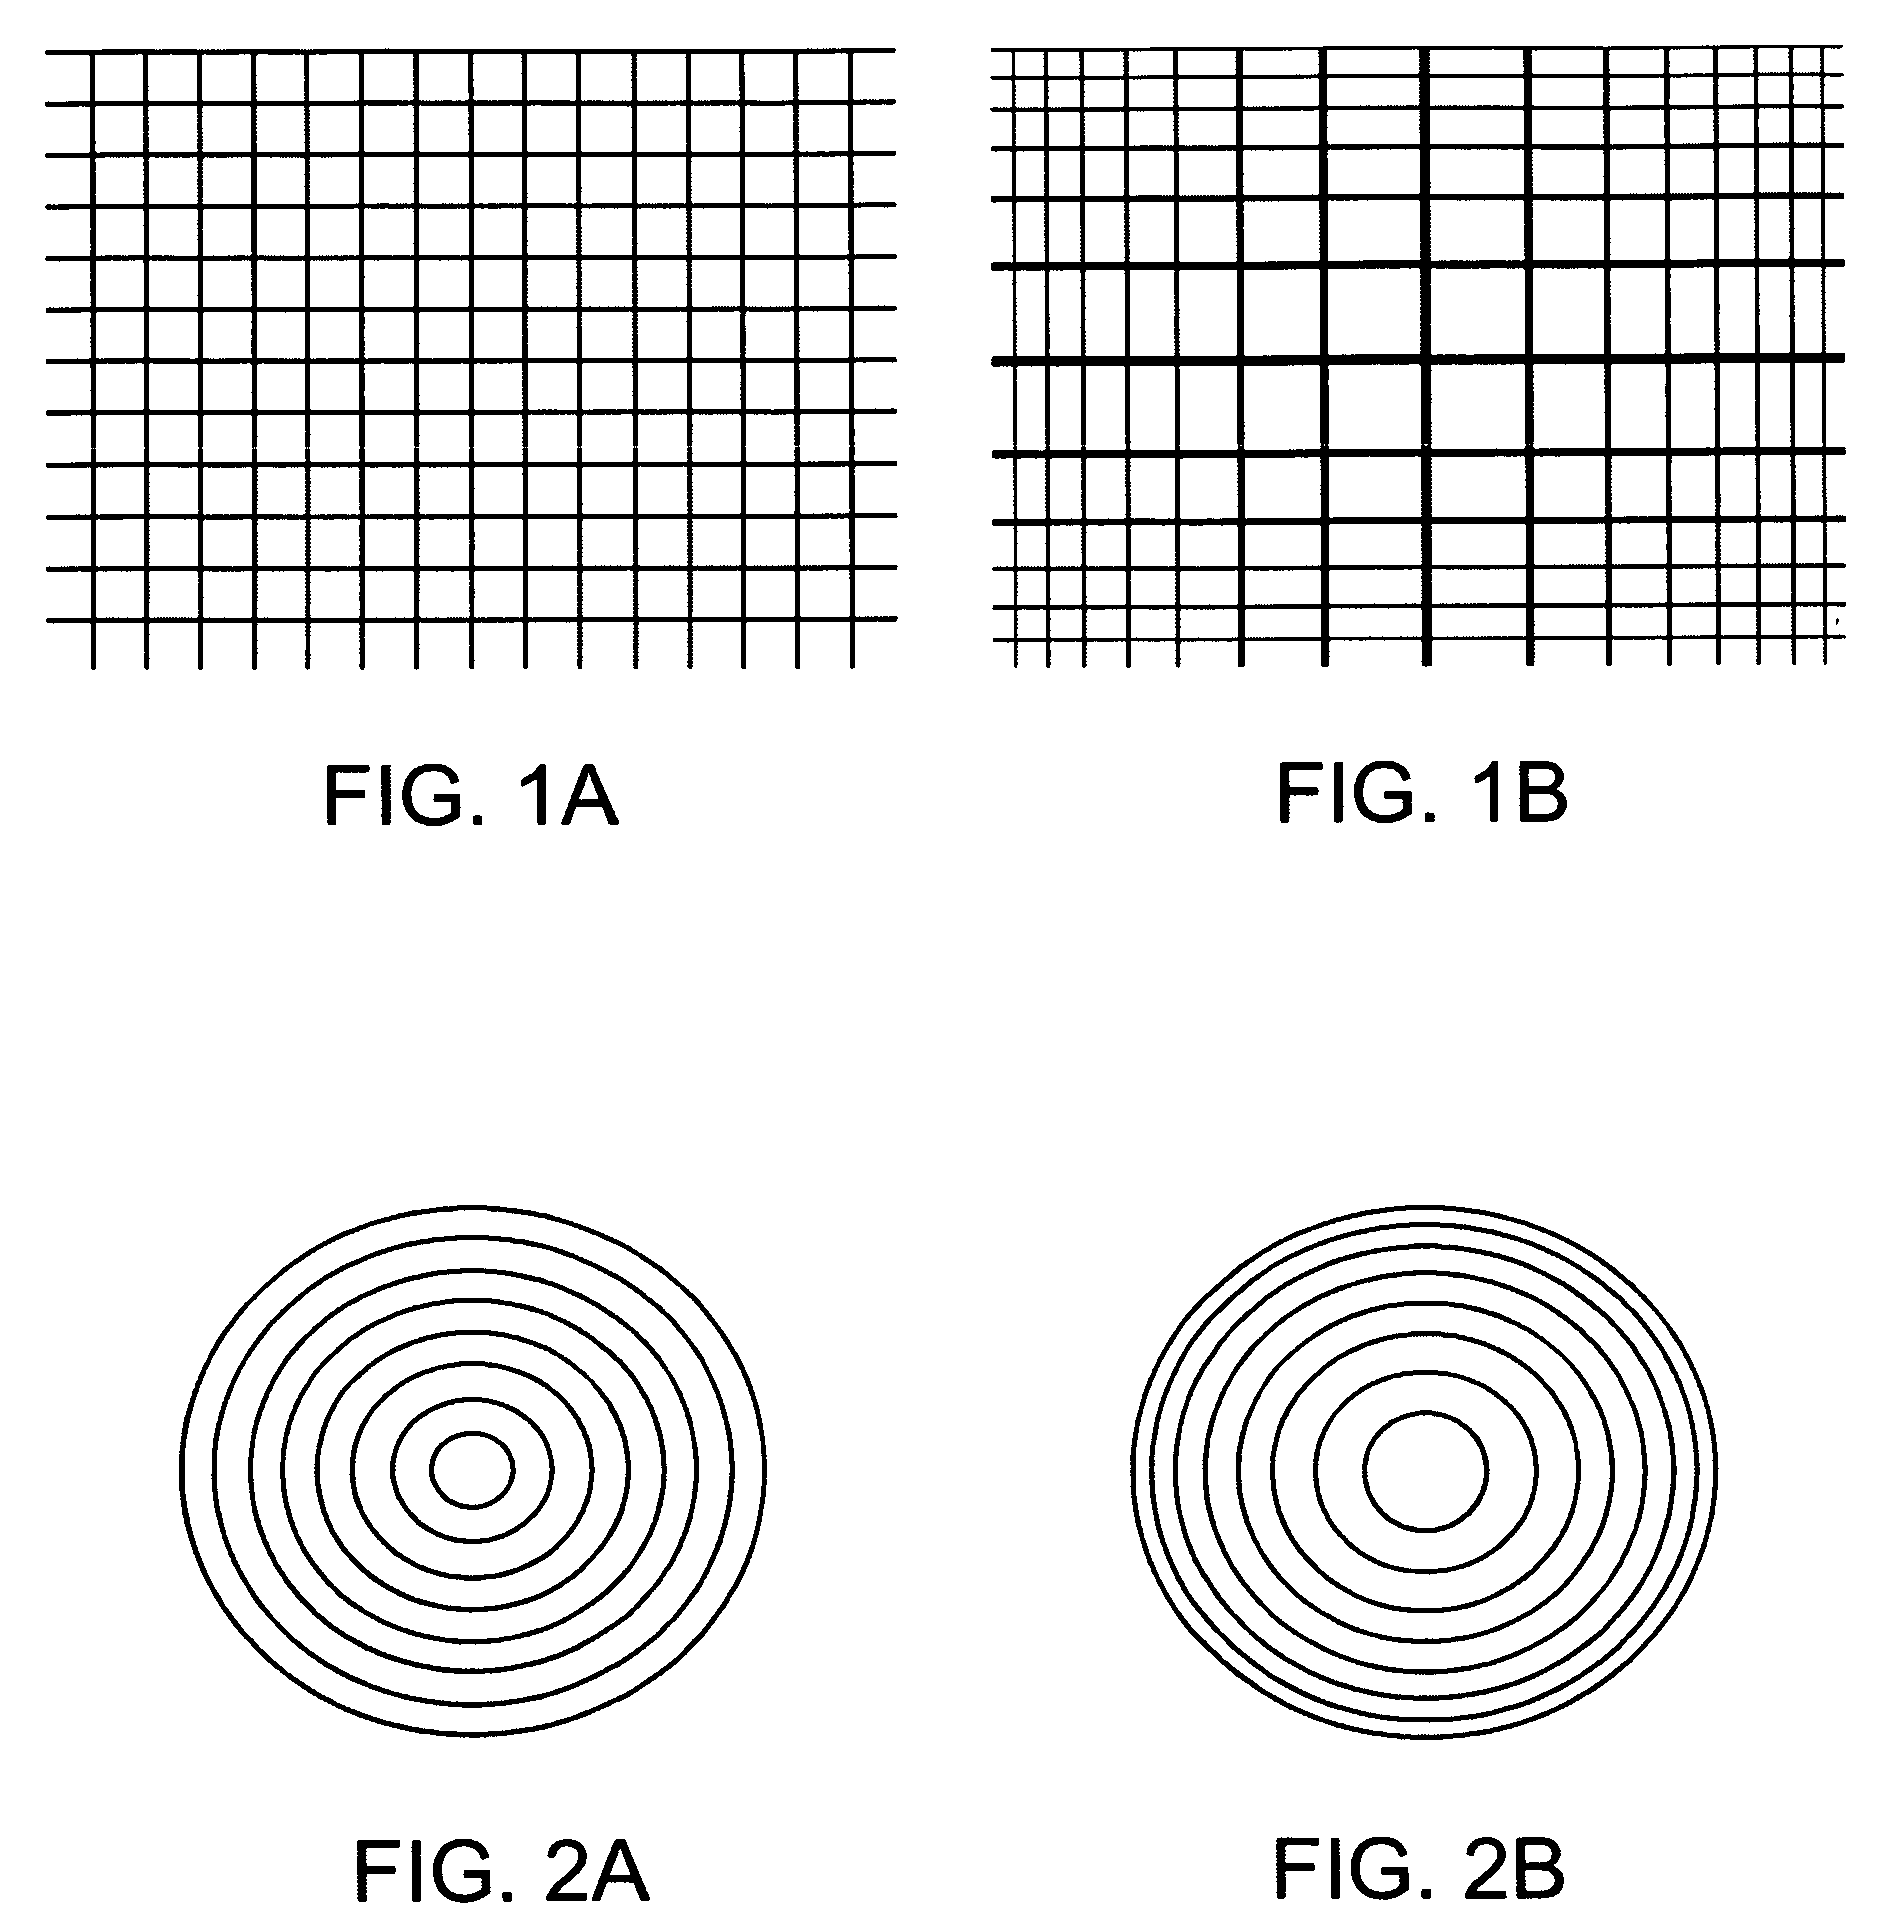 Imaging system with improved image quality and associated methods